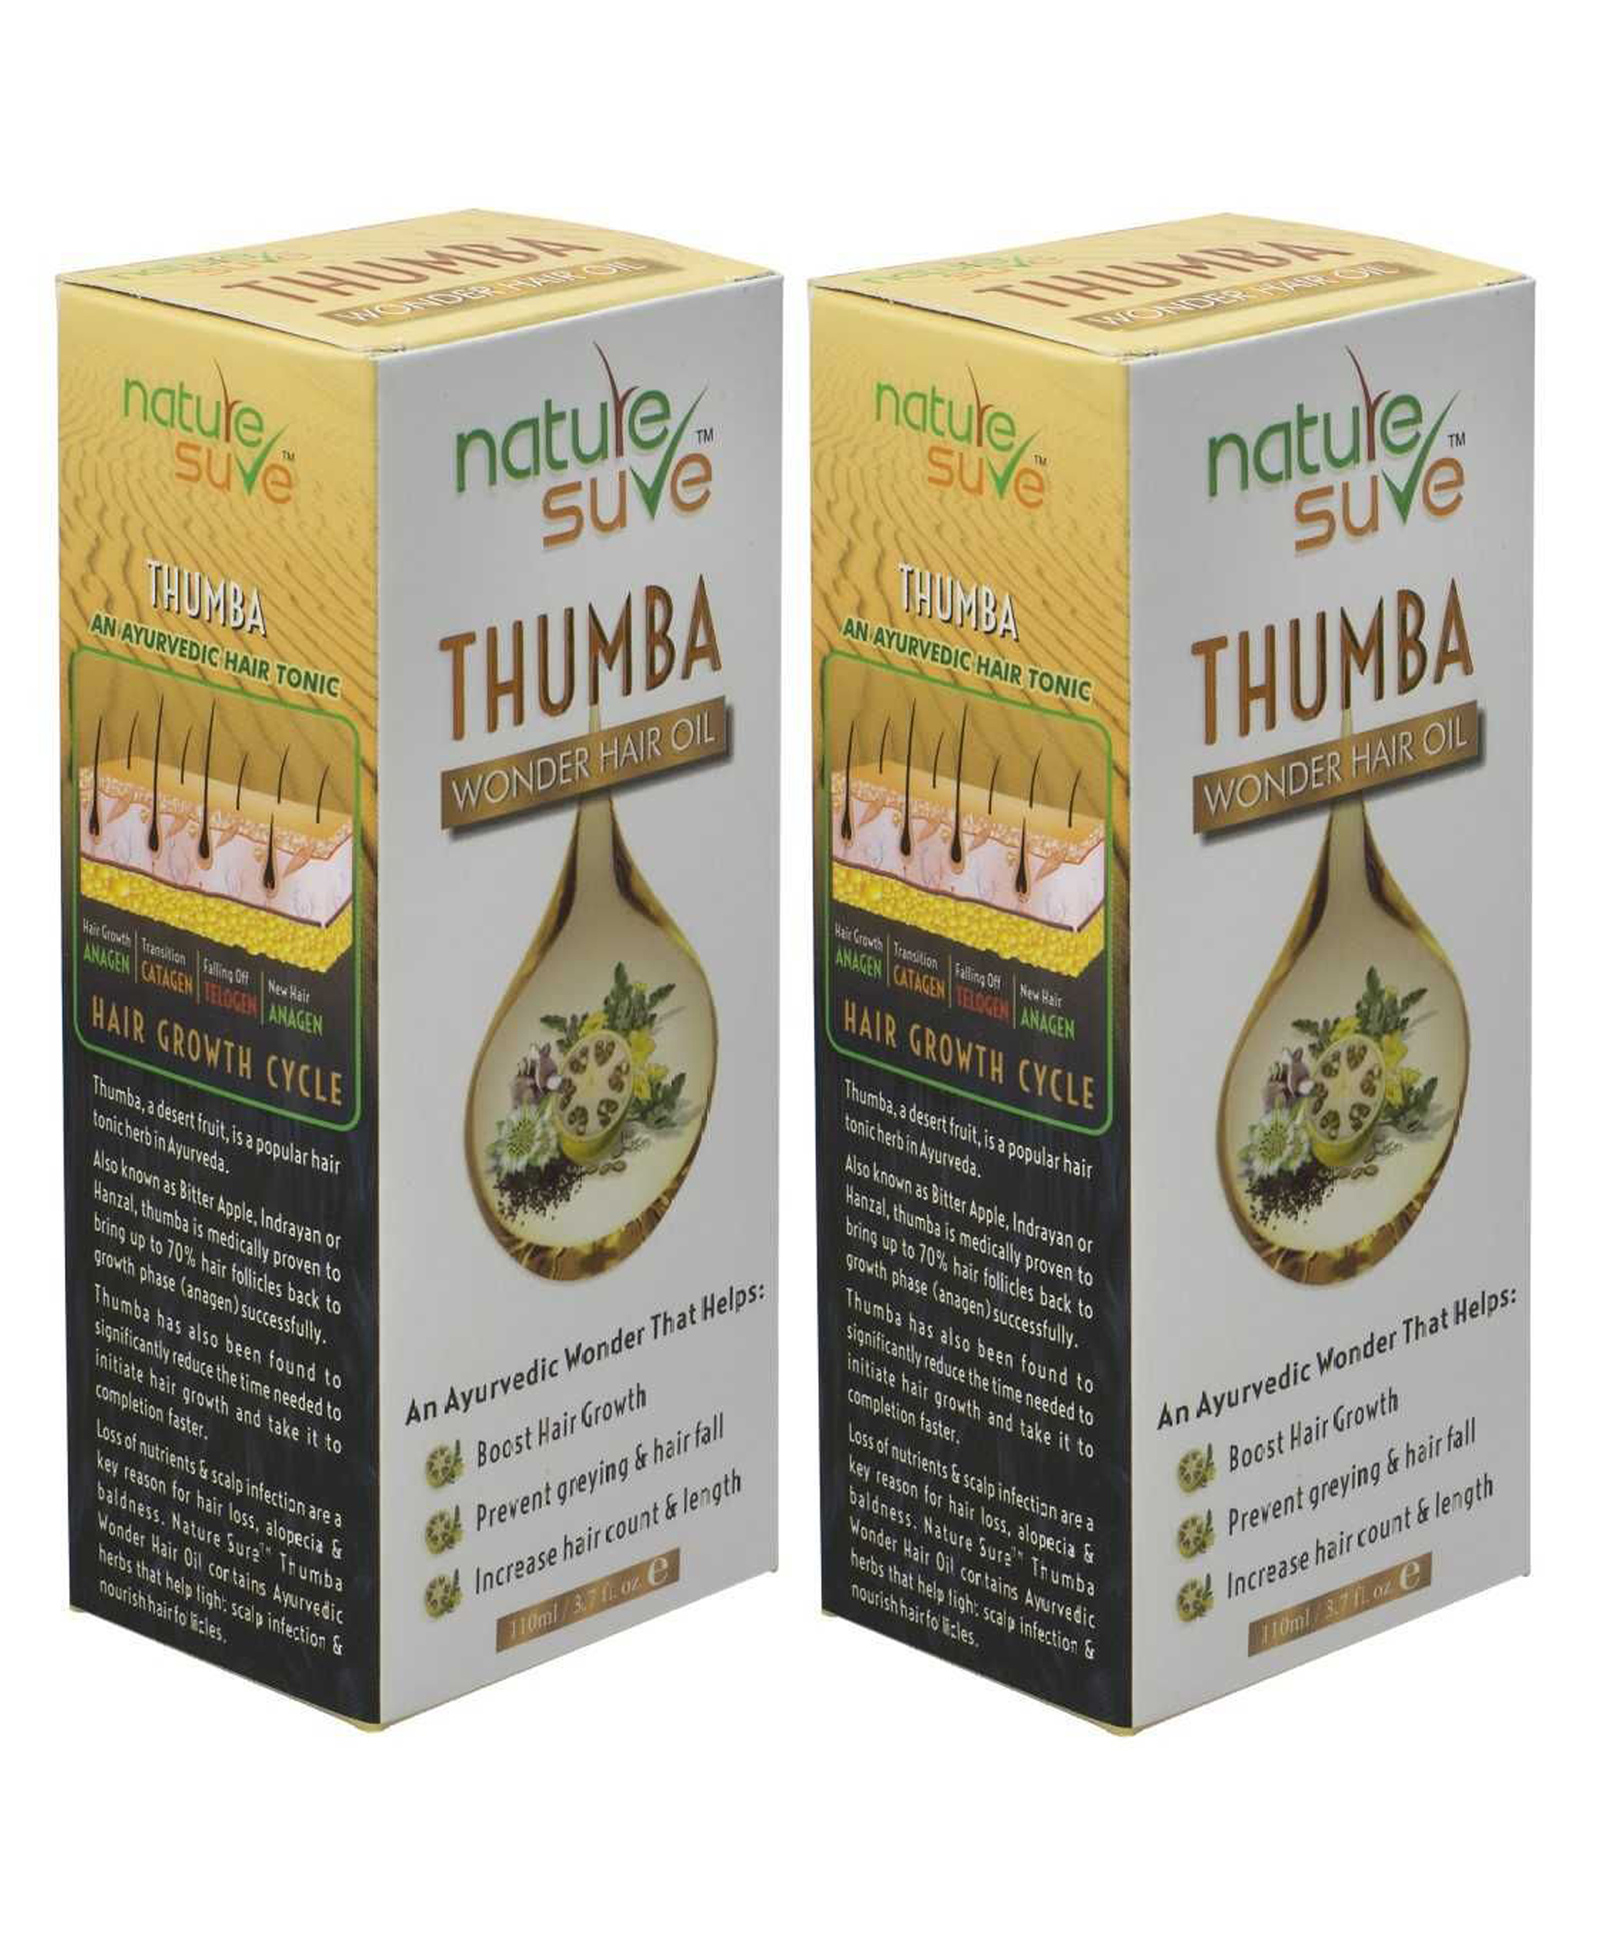 Nature Sure Thumba Wonder Hair Oil Pack of 2 - 220 ml Online in India, Buy  at Best Price from  - 11480910